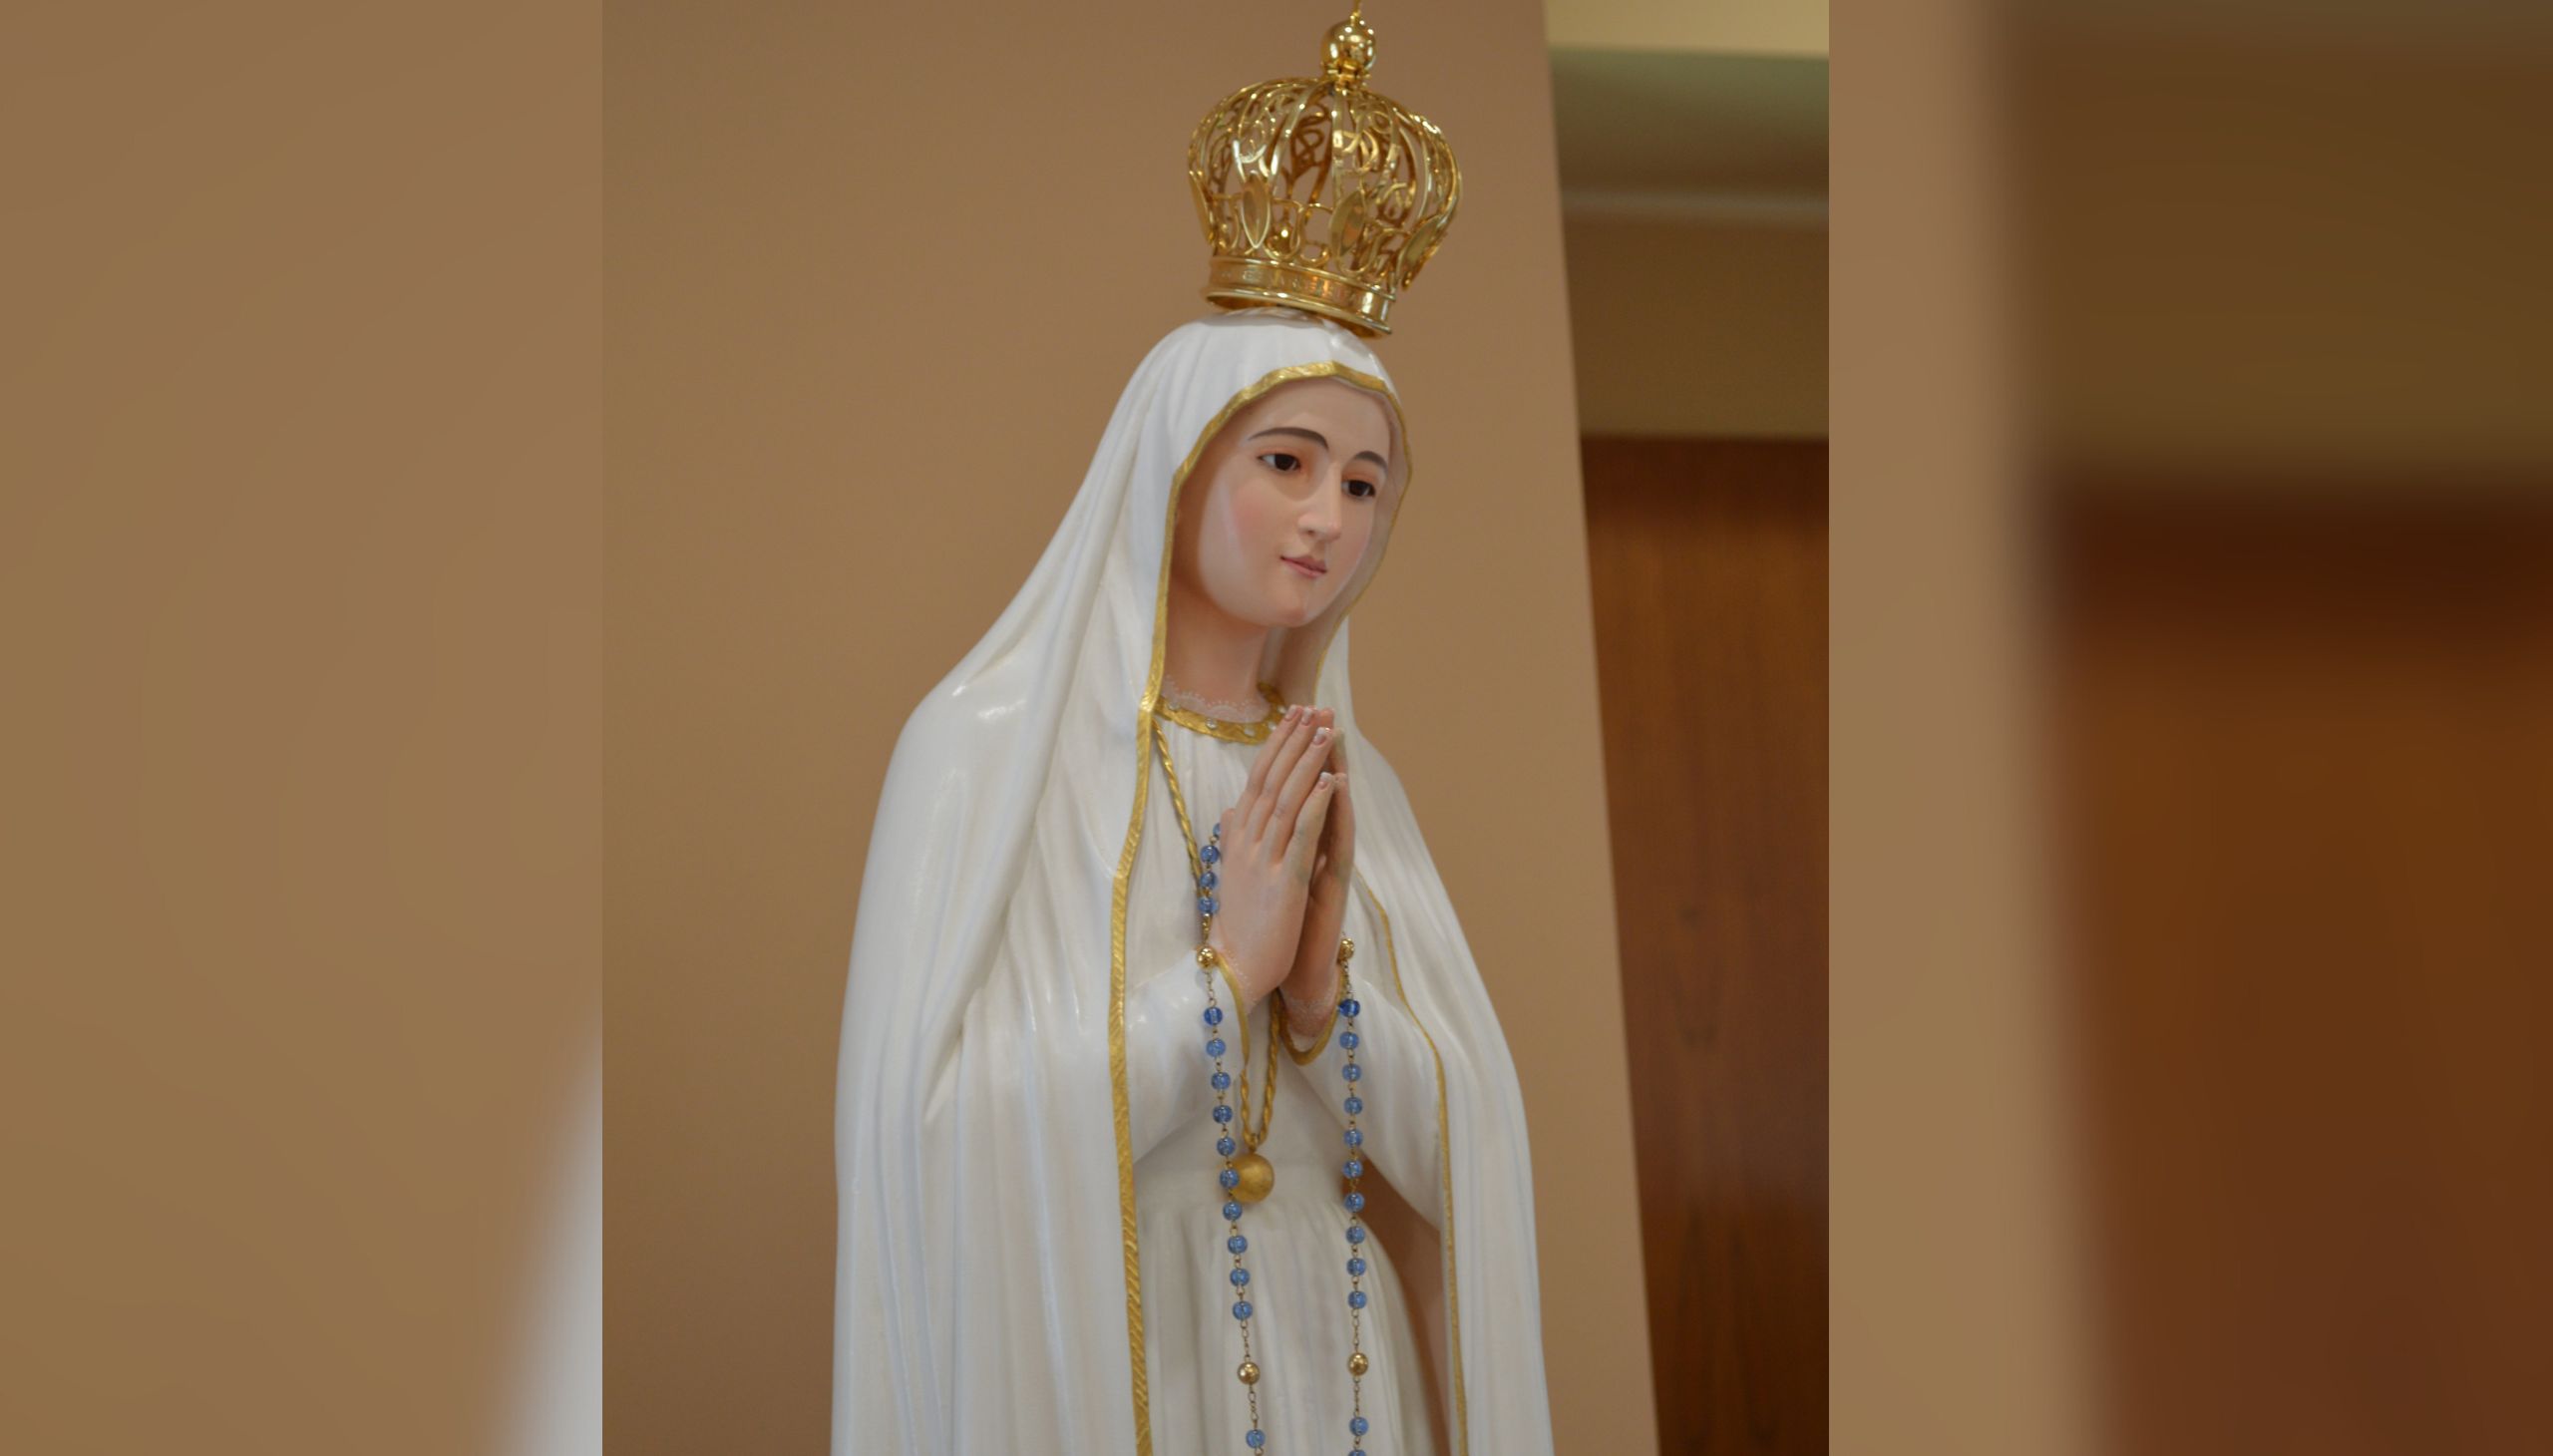 Dronning Etablere shampoo Our Lady of Fatima statue to parade through Newark on Saturday – Jersey  Catholic